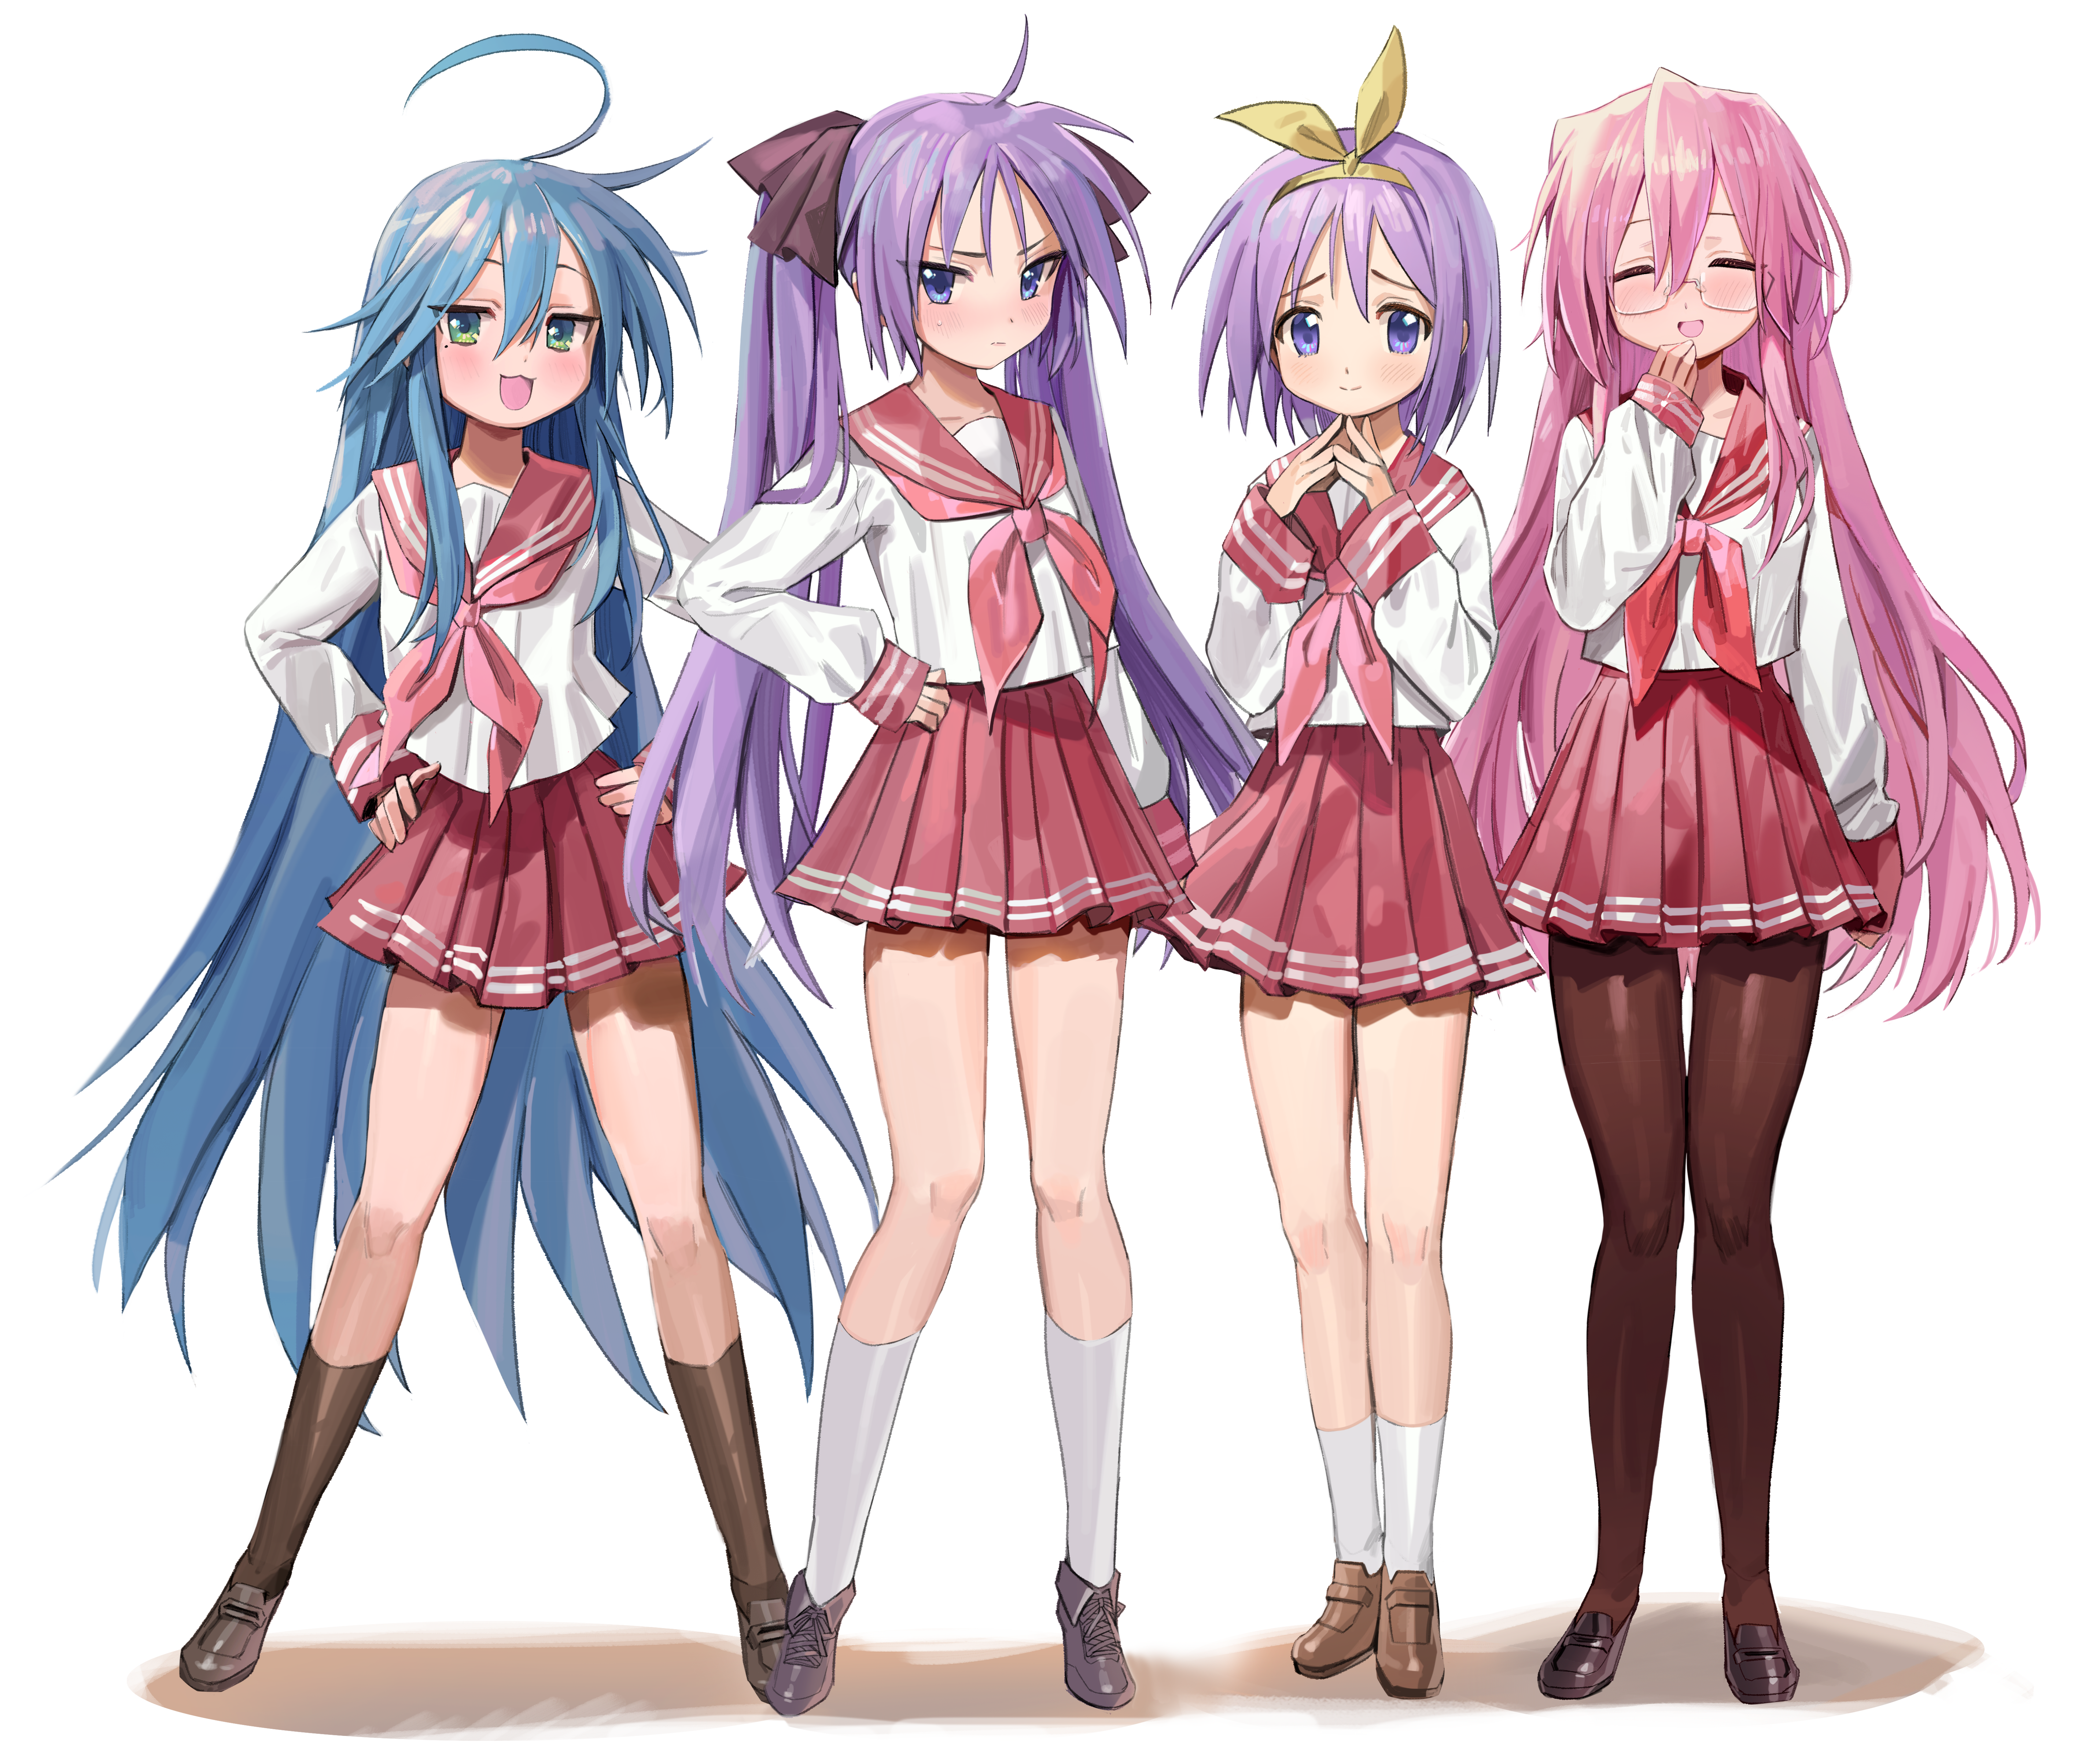 6 Anime Like LuckyStar Recommendations